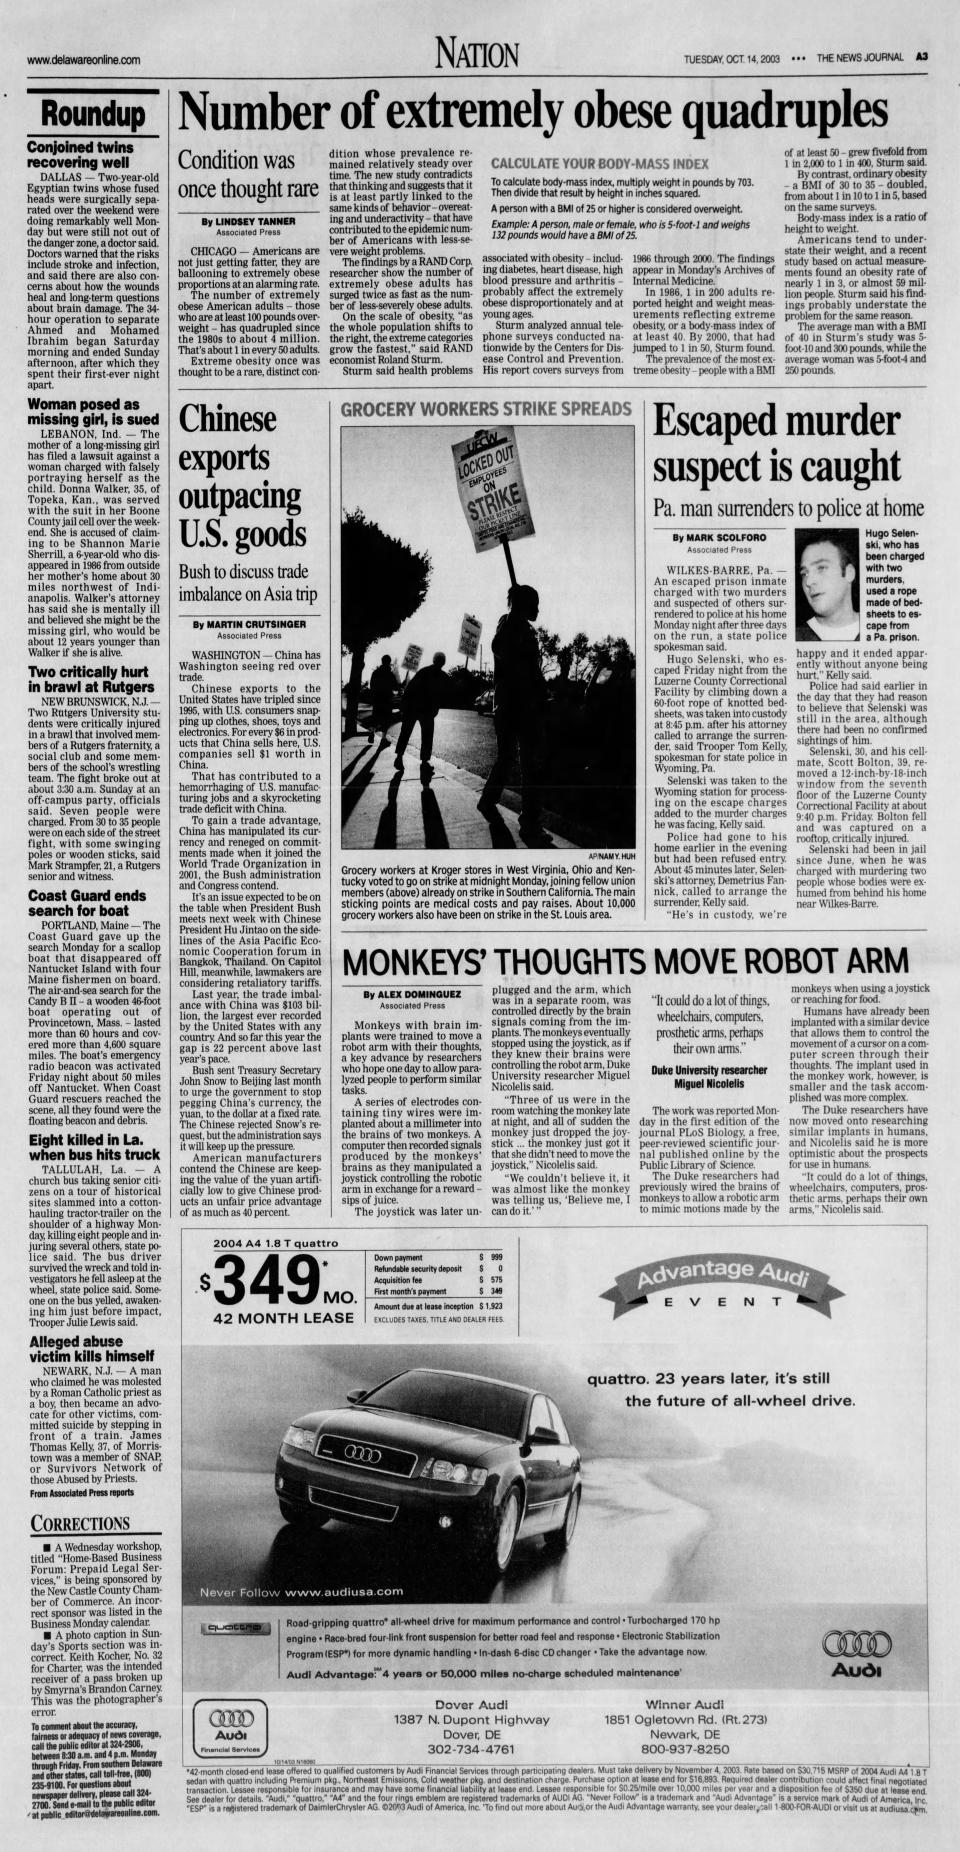 Page A3 of The News Journal from Oct. 14, 2003.